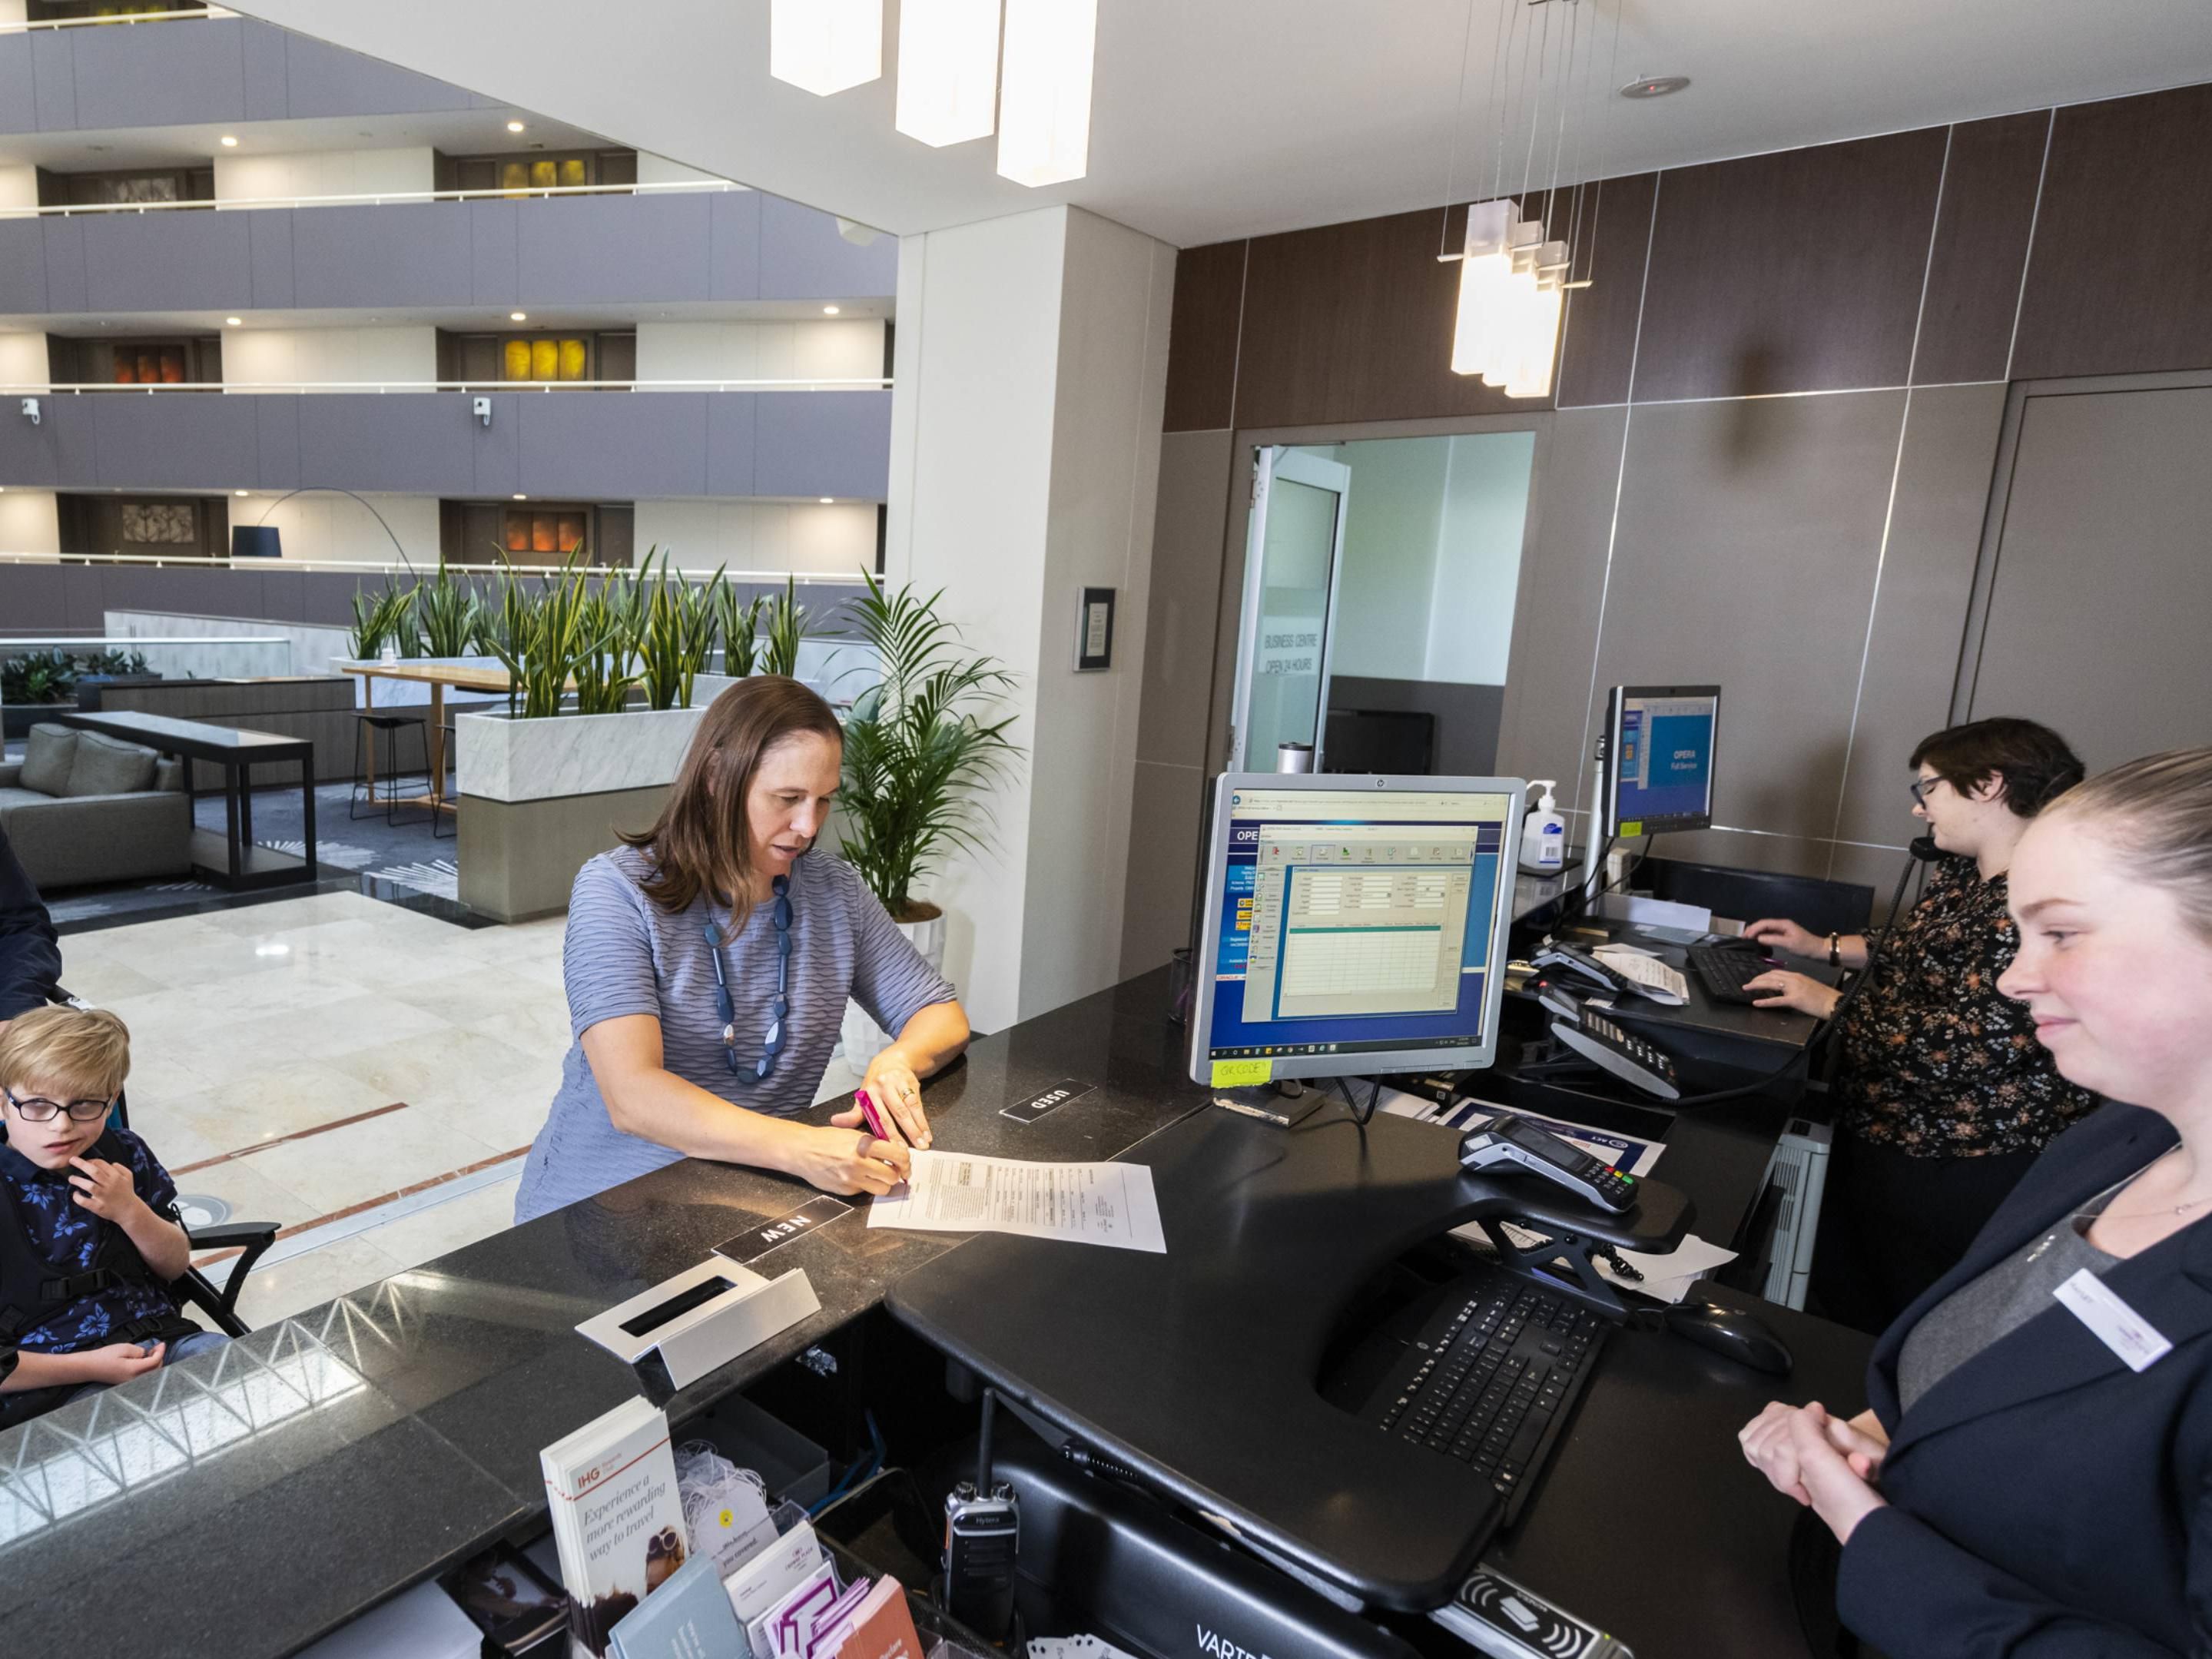 Crowne Plaza has accessible rooms, spaces, and services that are available to guests with mobility issues
Disabled Parking is available.

Emergency hearing deaf guards are available on request.

There is unobstructed and level/ramp access to the hotel's front entrance.